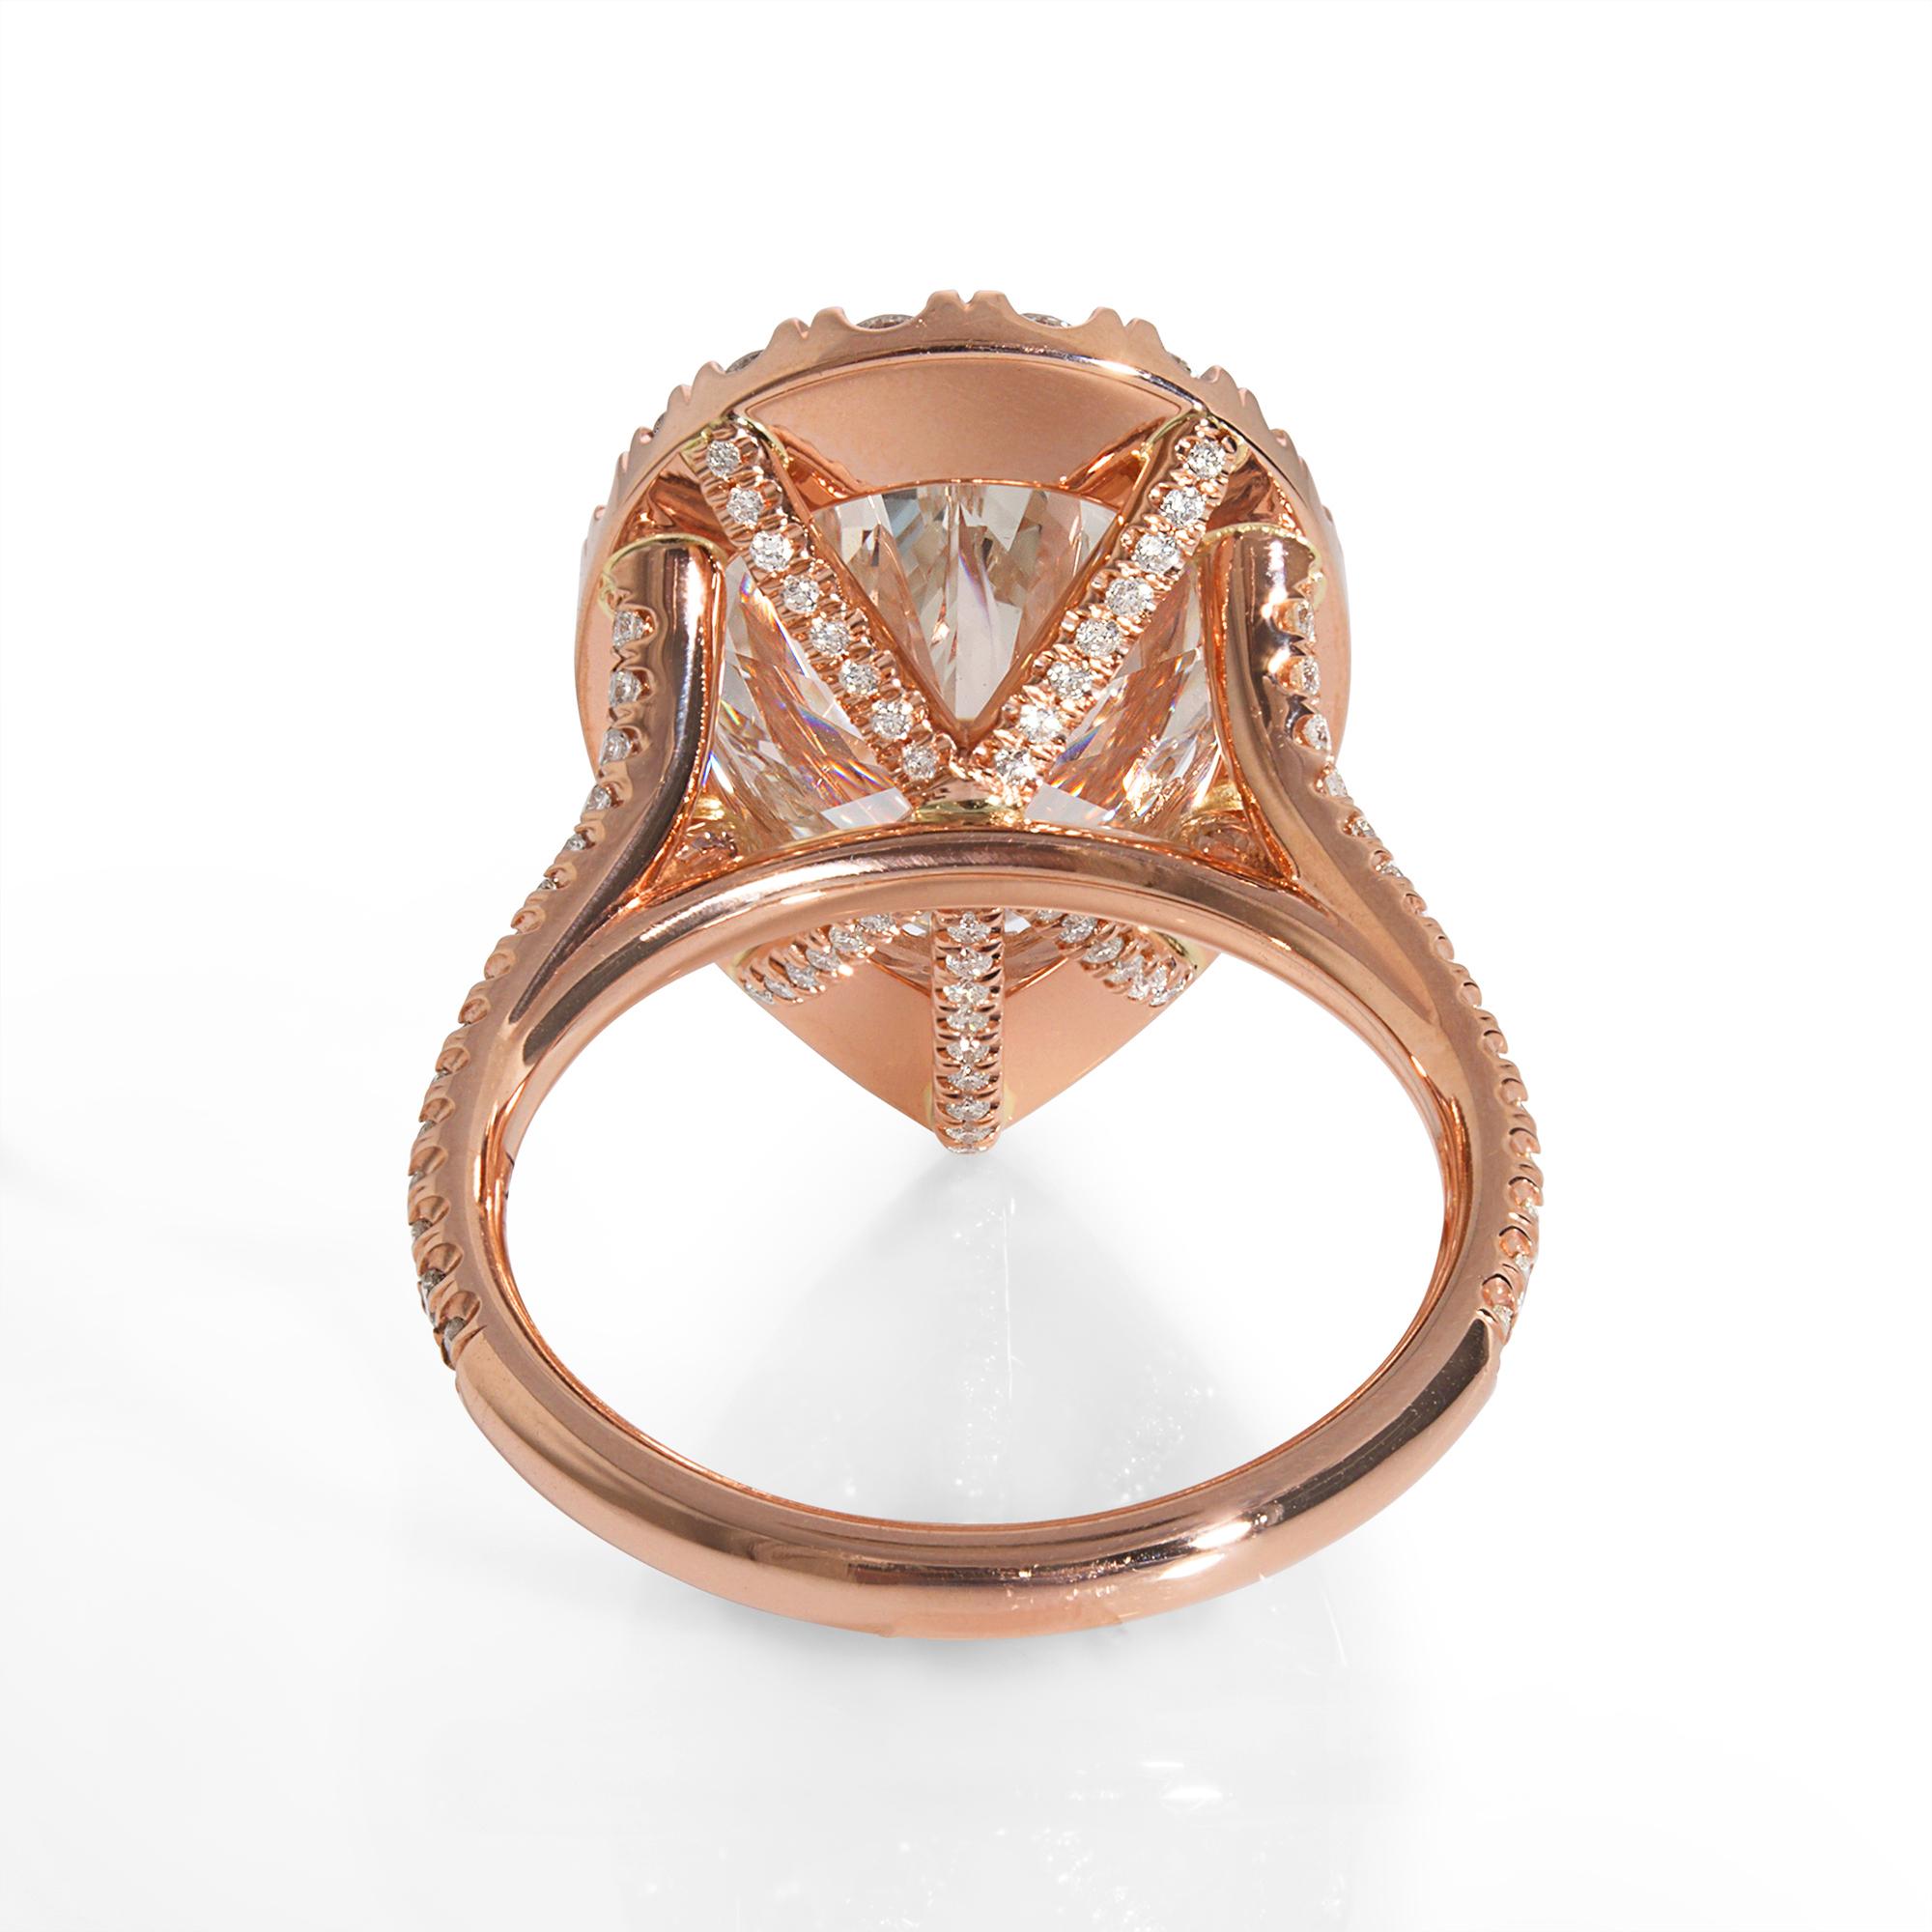 Pear Cut GIA 6.04 Carat Pear Shaped Diamond Engagement Wedding Pave Halo Rose Gold Ring